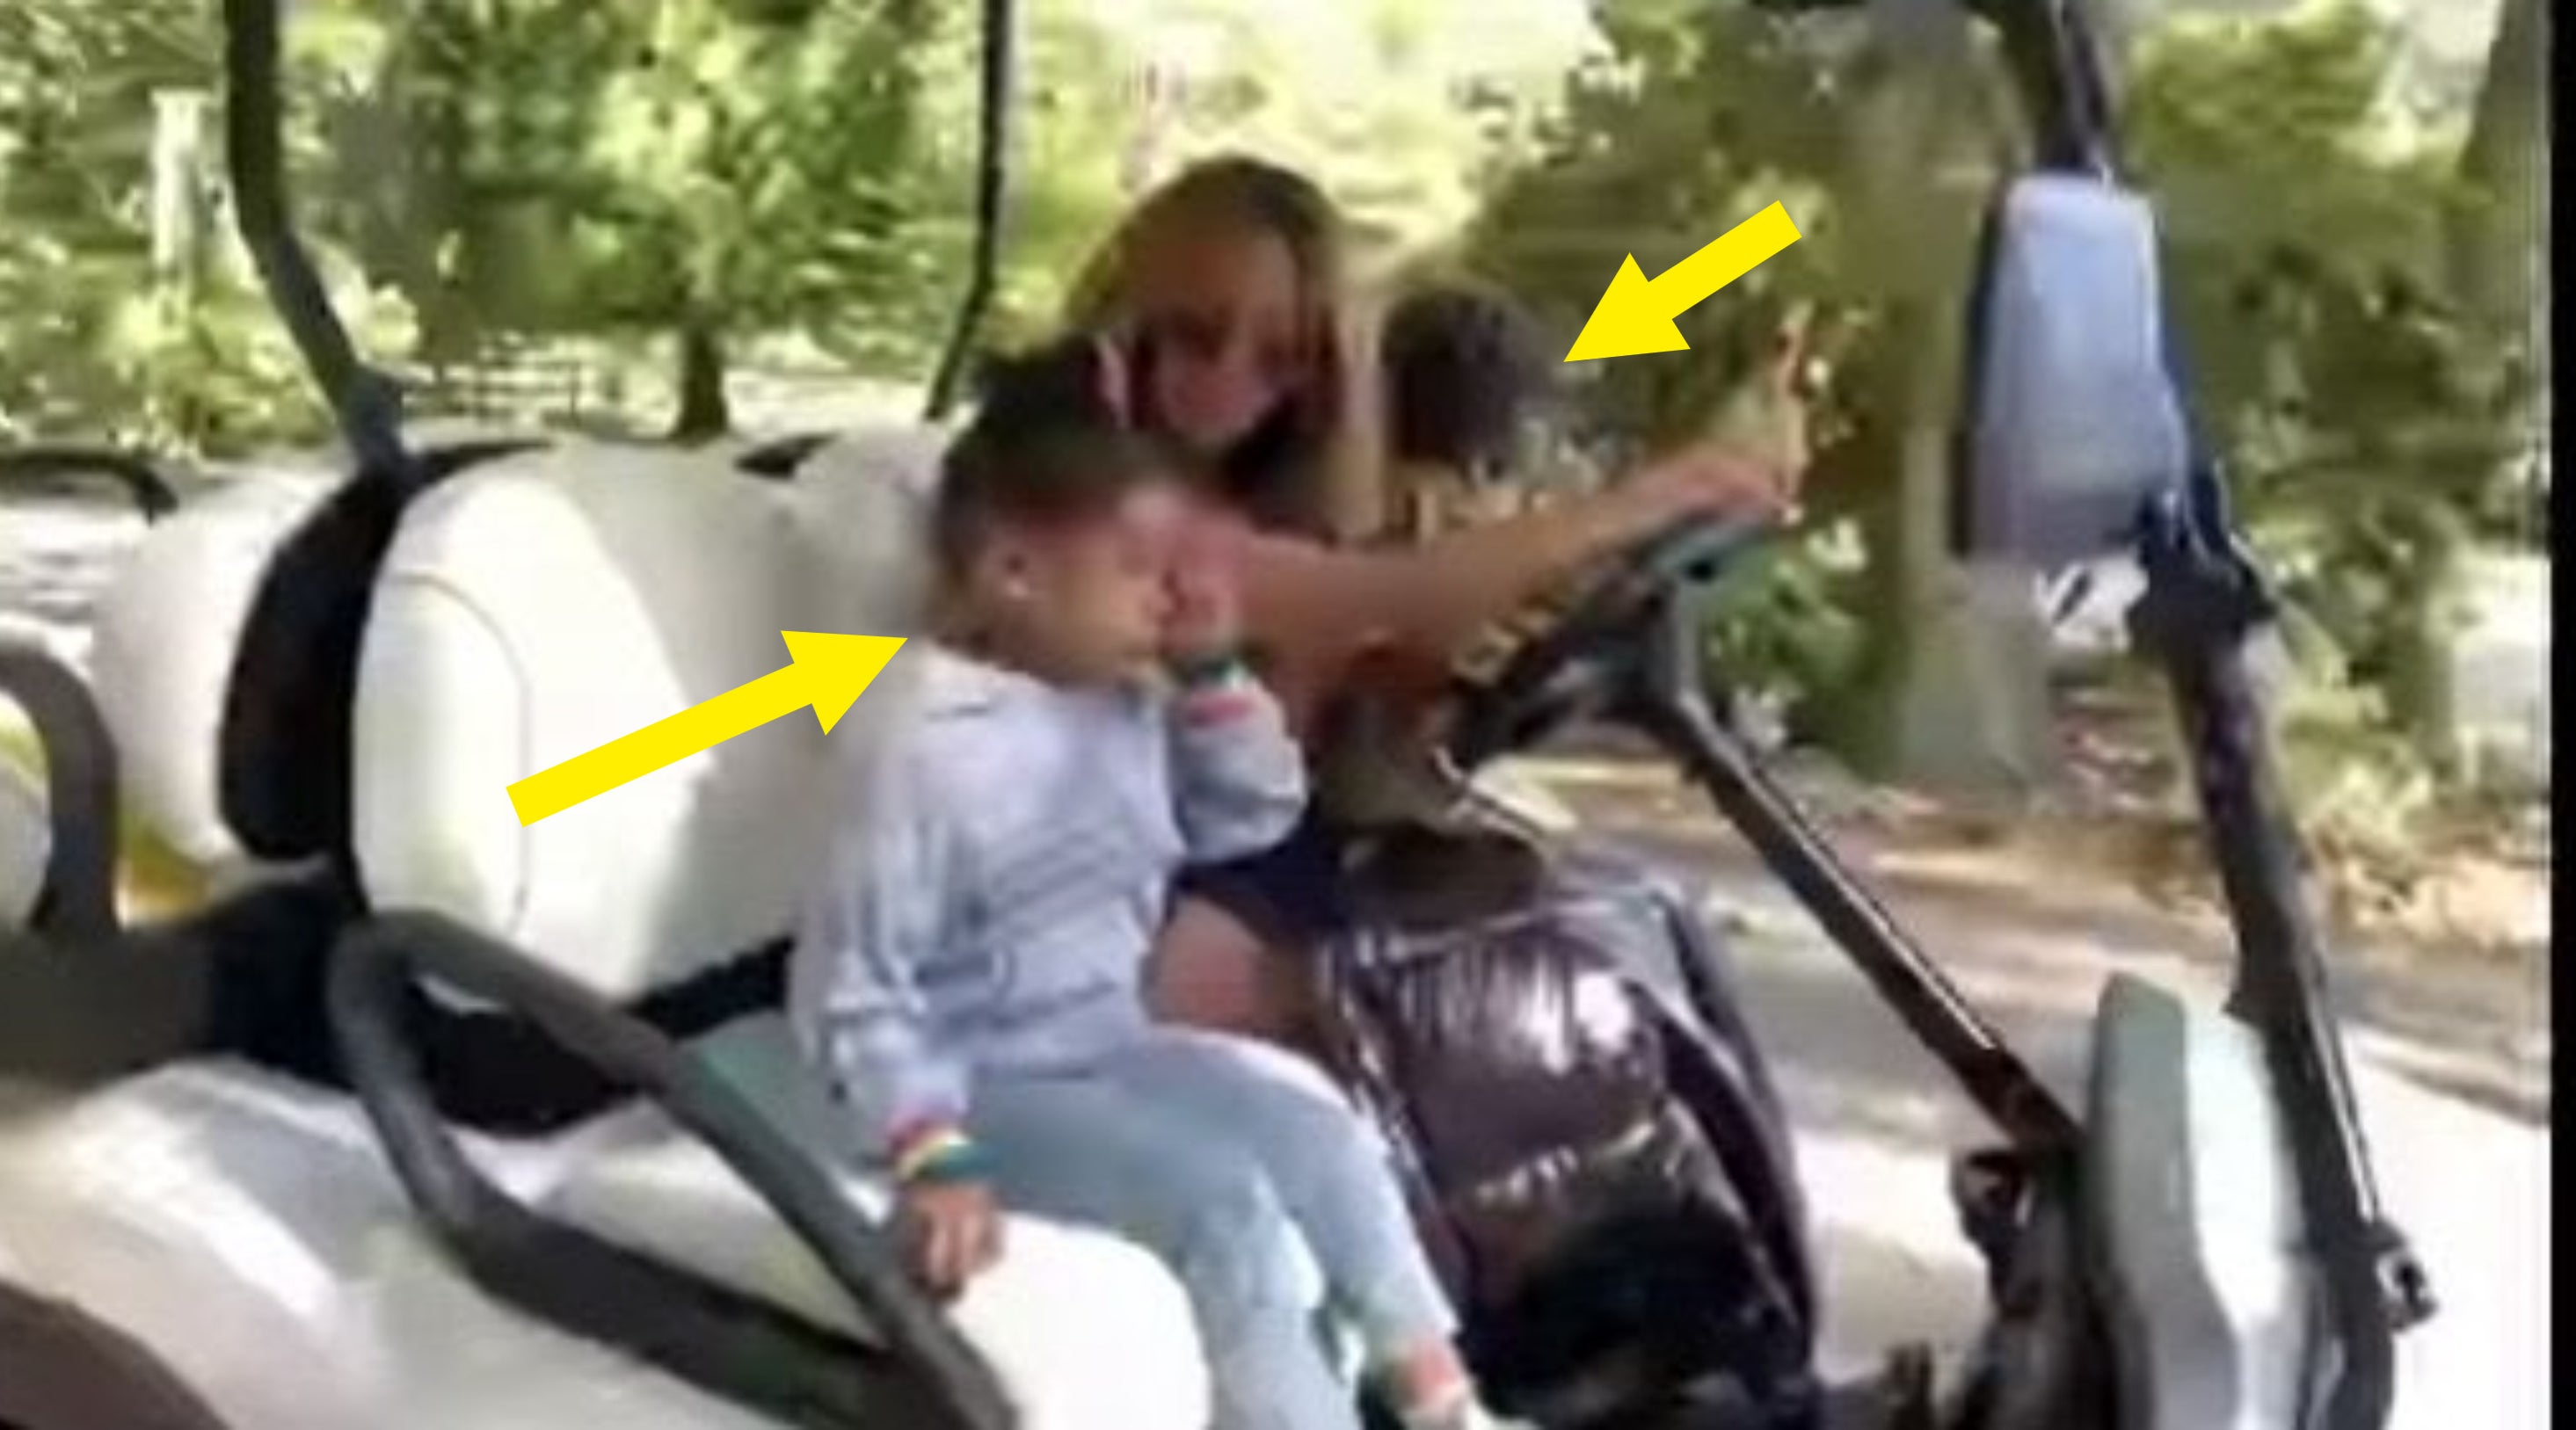 Beyoncé and the twins in a golf cart